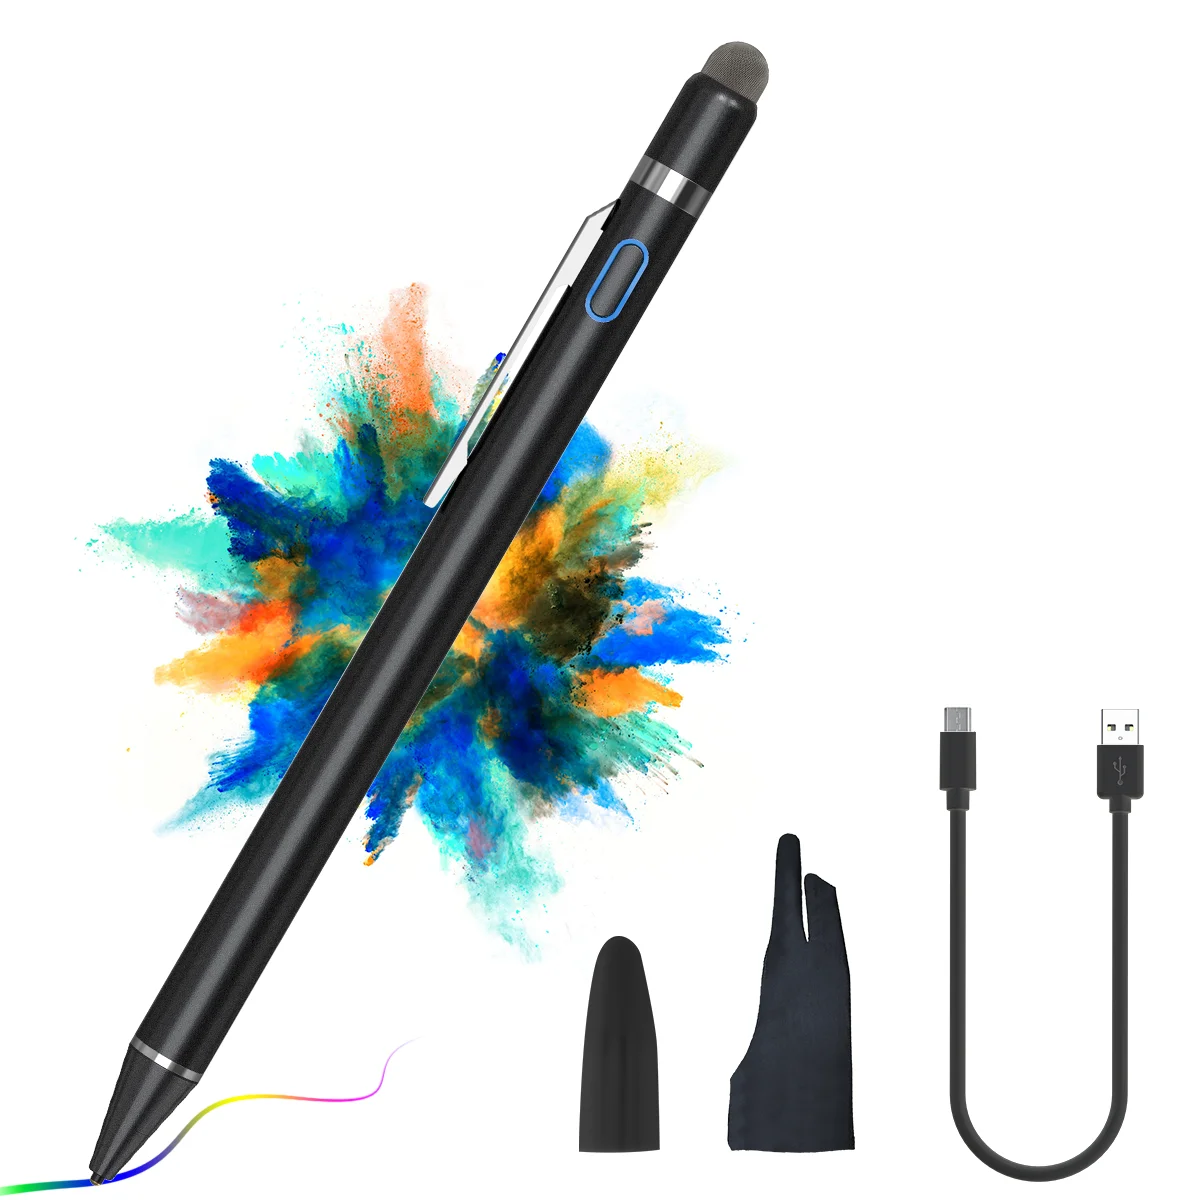 Active Stylus Pen Compatible For iOS Android Touch Screens Universal Fine Point Stylus Pen For Xiaomi iPad iPhone Samsung Write